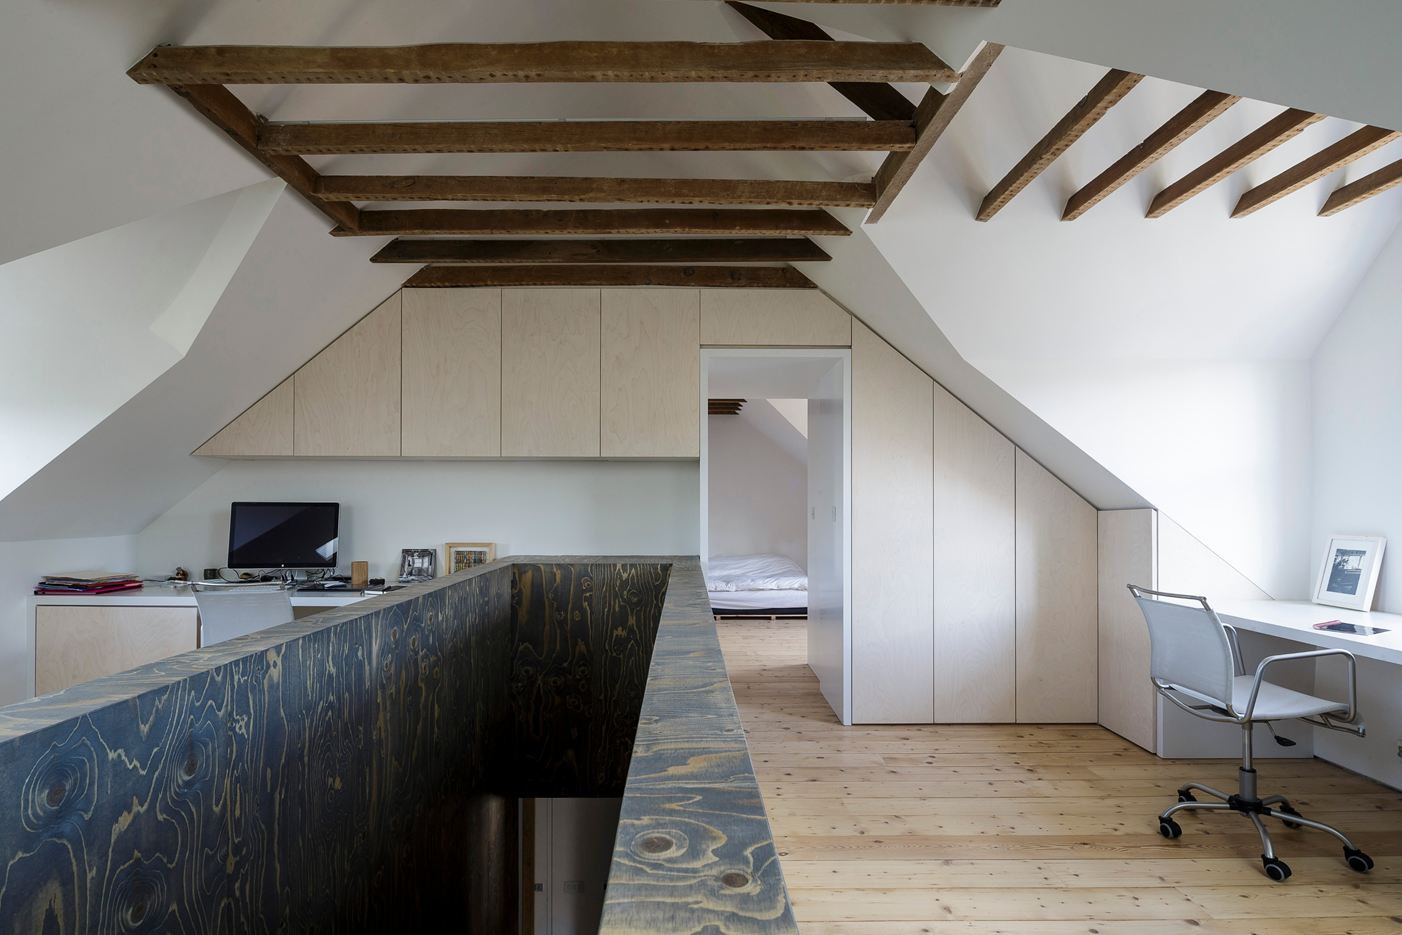 Semi Detached Residence in Oxford, UK by Delvendahl Martin Architects